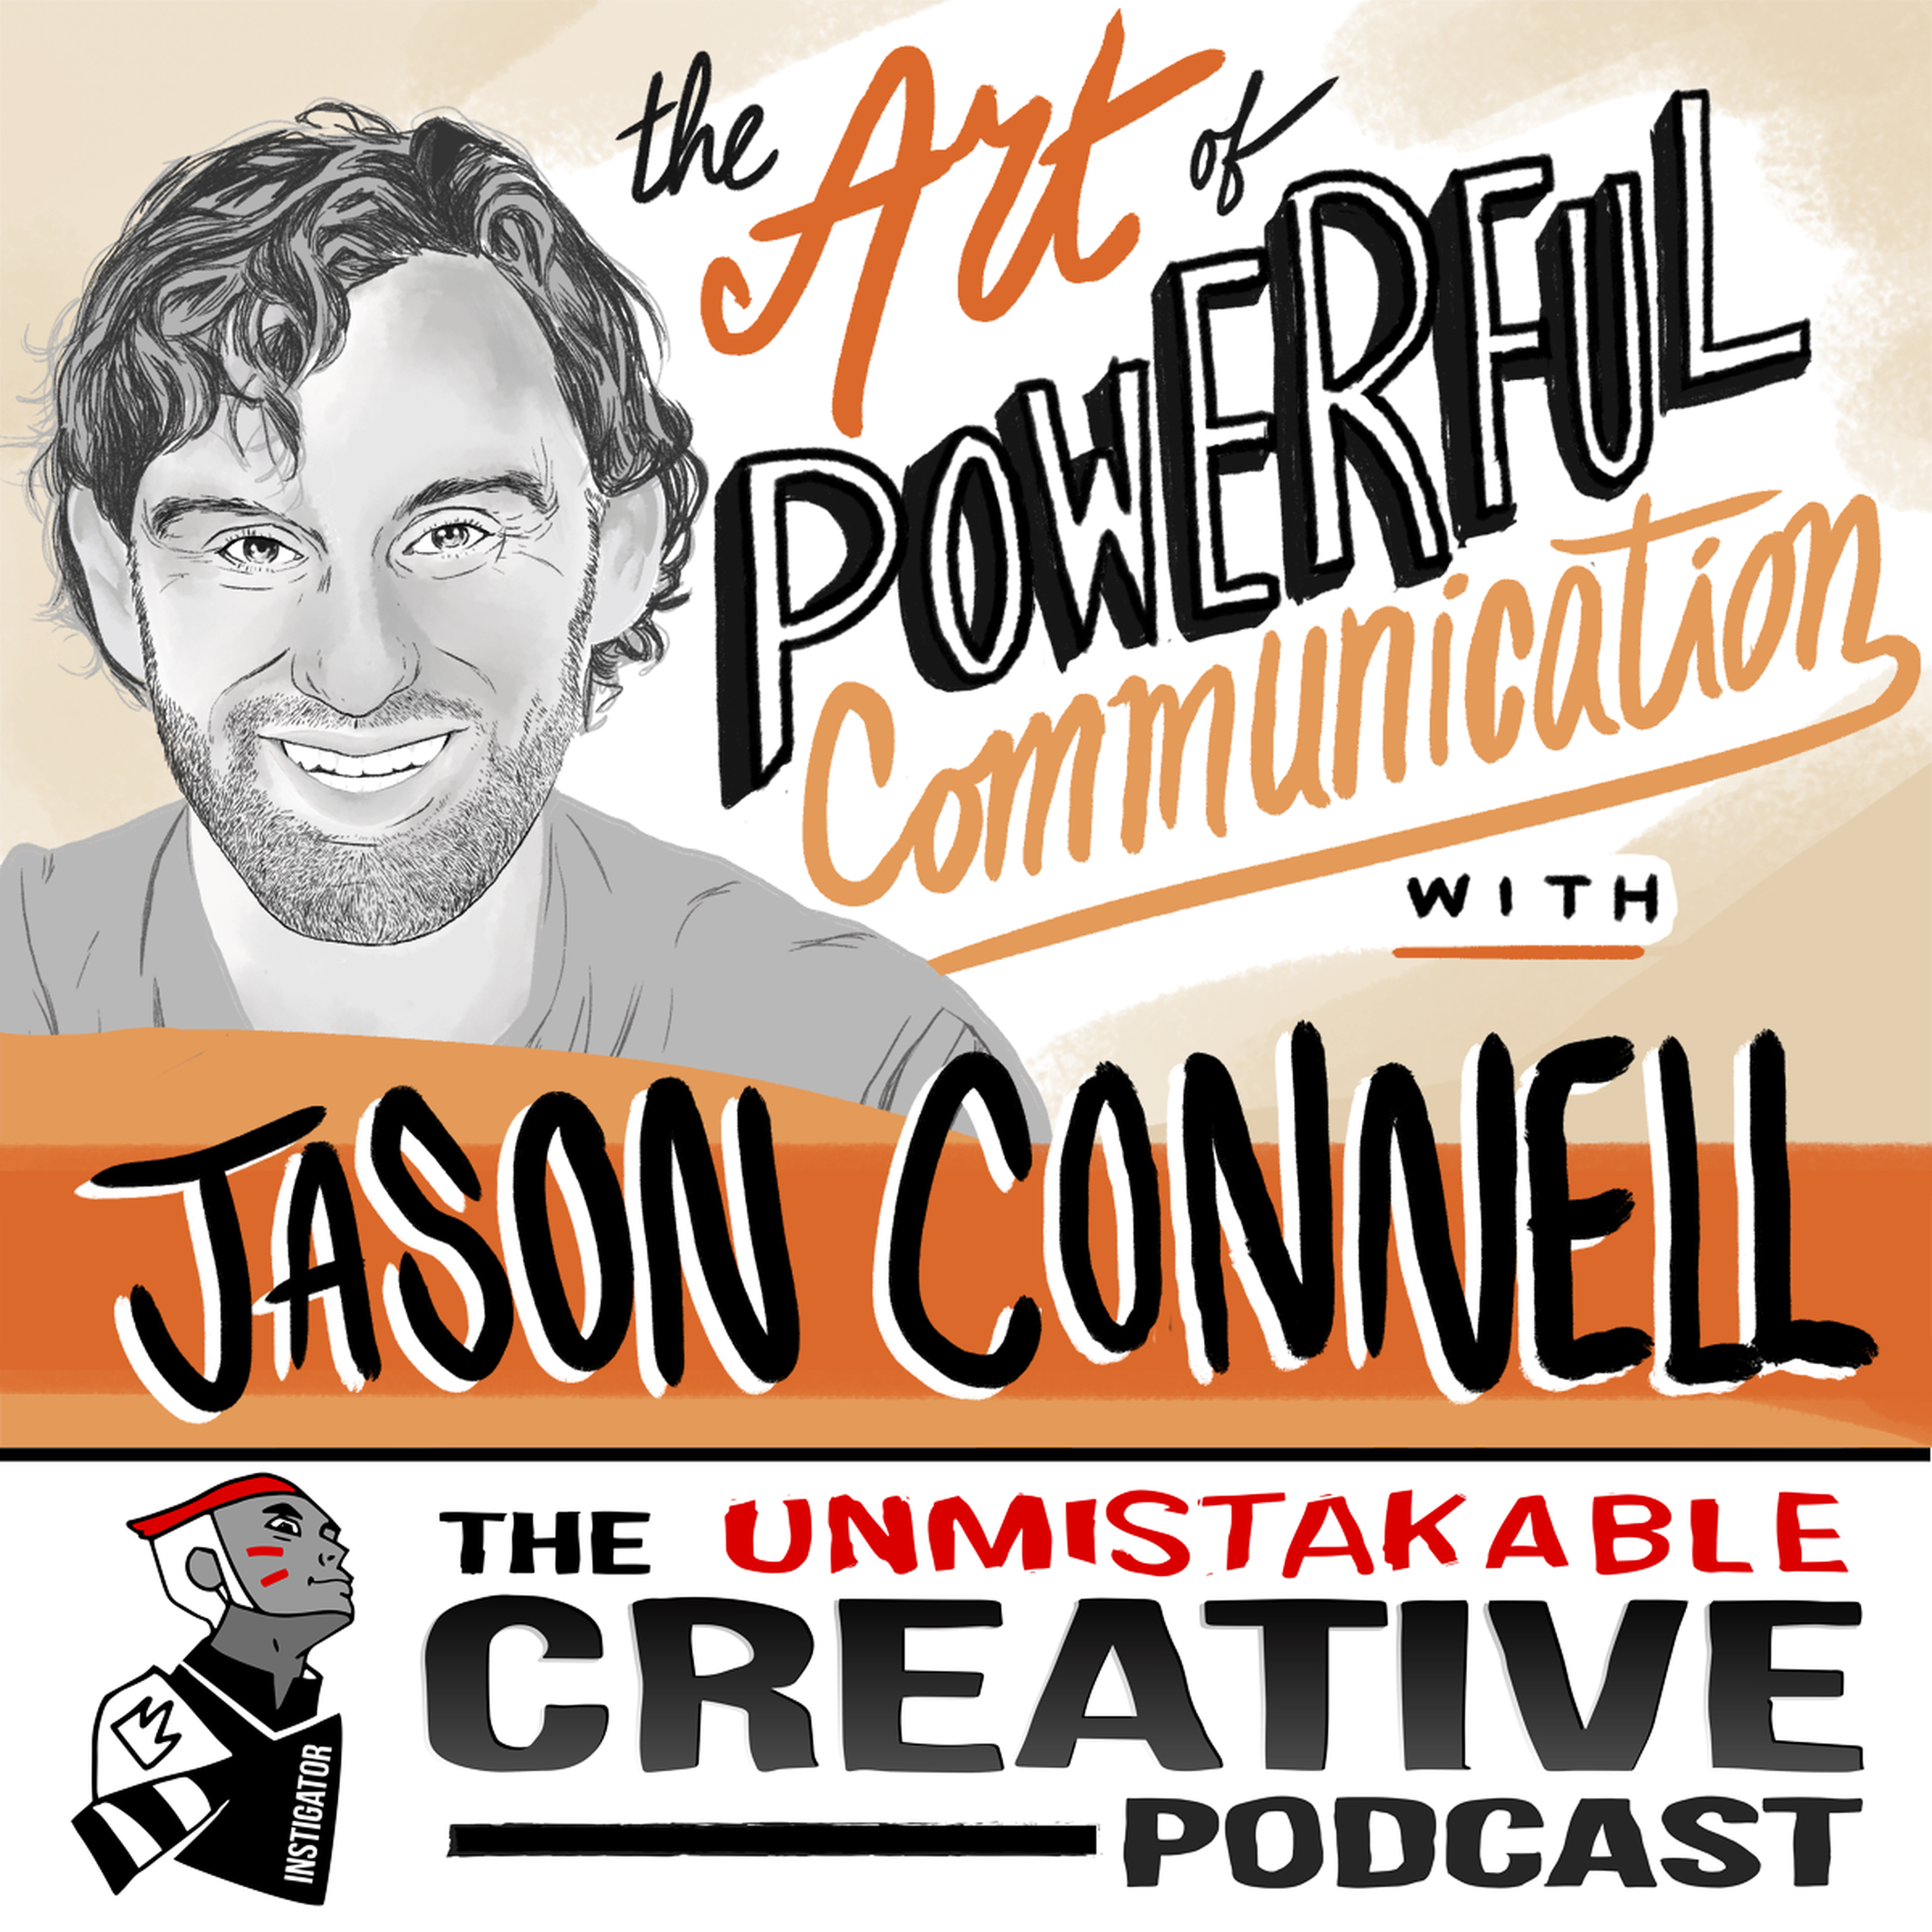 Jason Connell: The Art of Powerful Communication